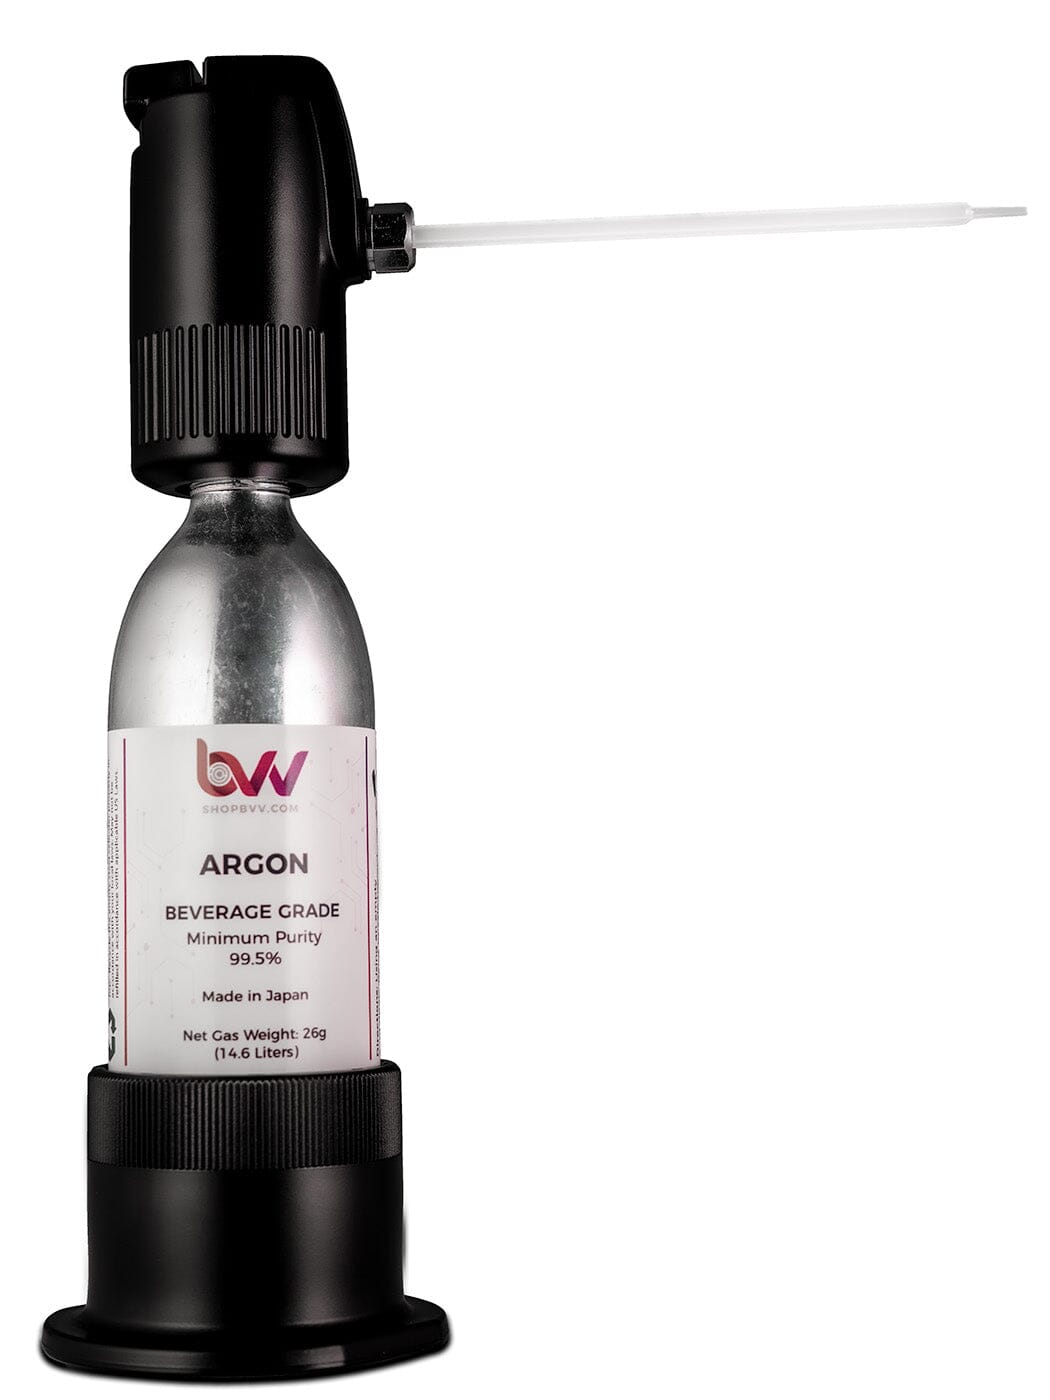 Argon Gas 99.5% - Pure gas for preserving terpenes in flowers and concentrates New Products BVV 14.6 Liters With Regulator 